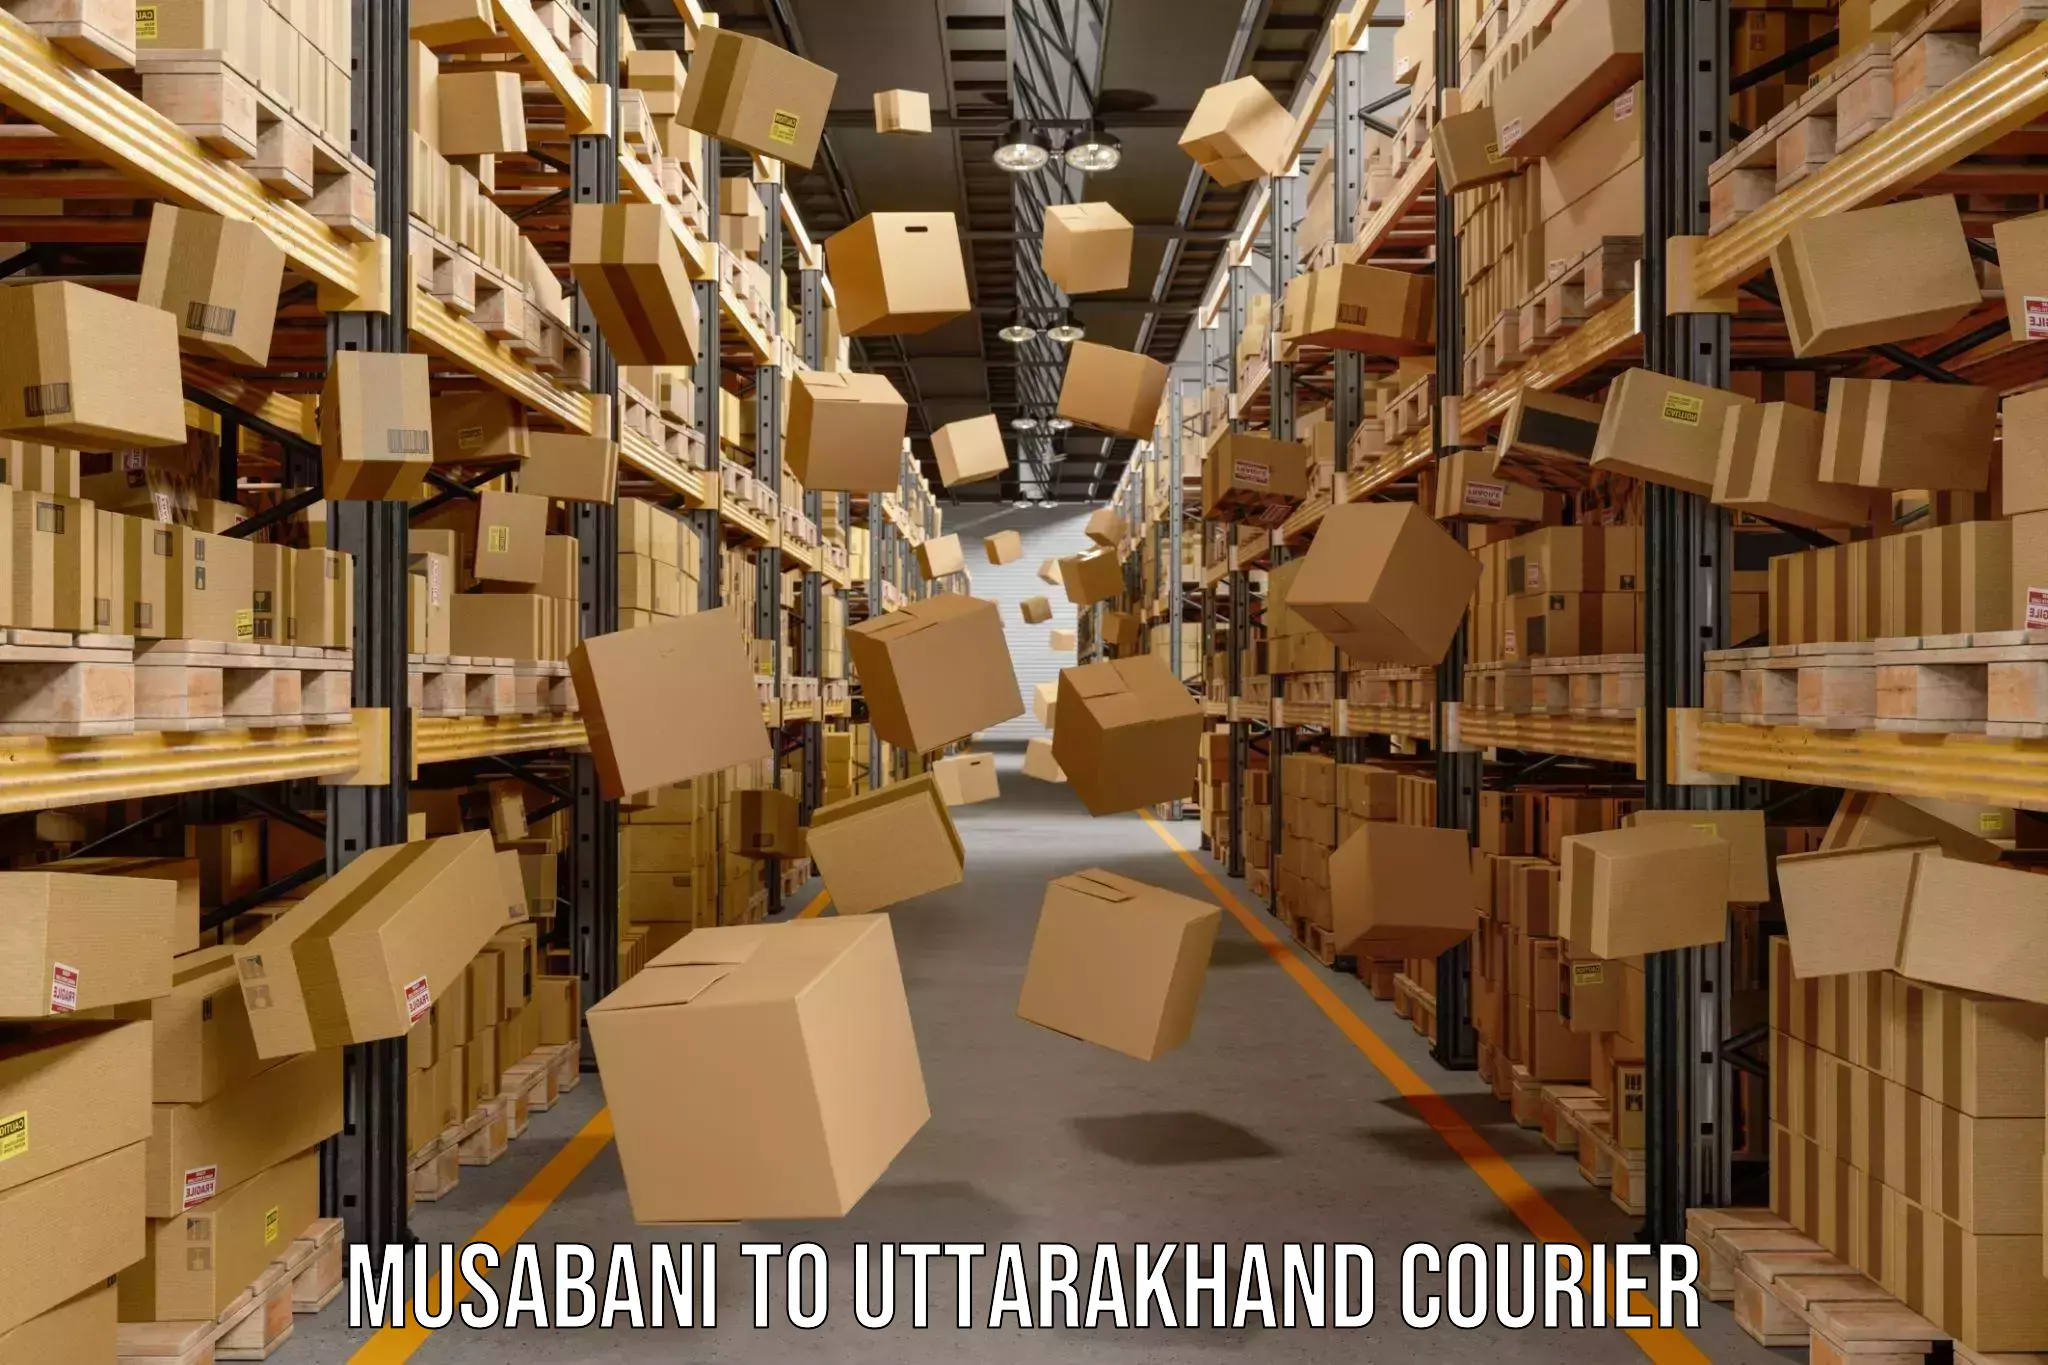 Personal courier services in Musabani to Dehradun